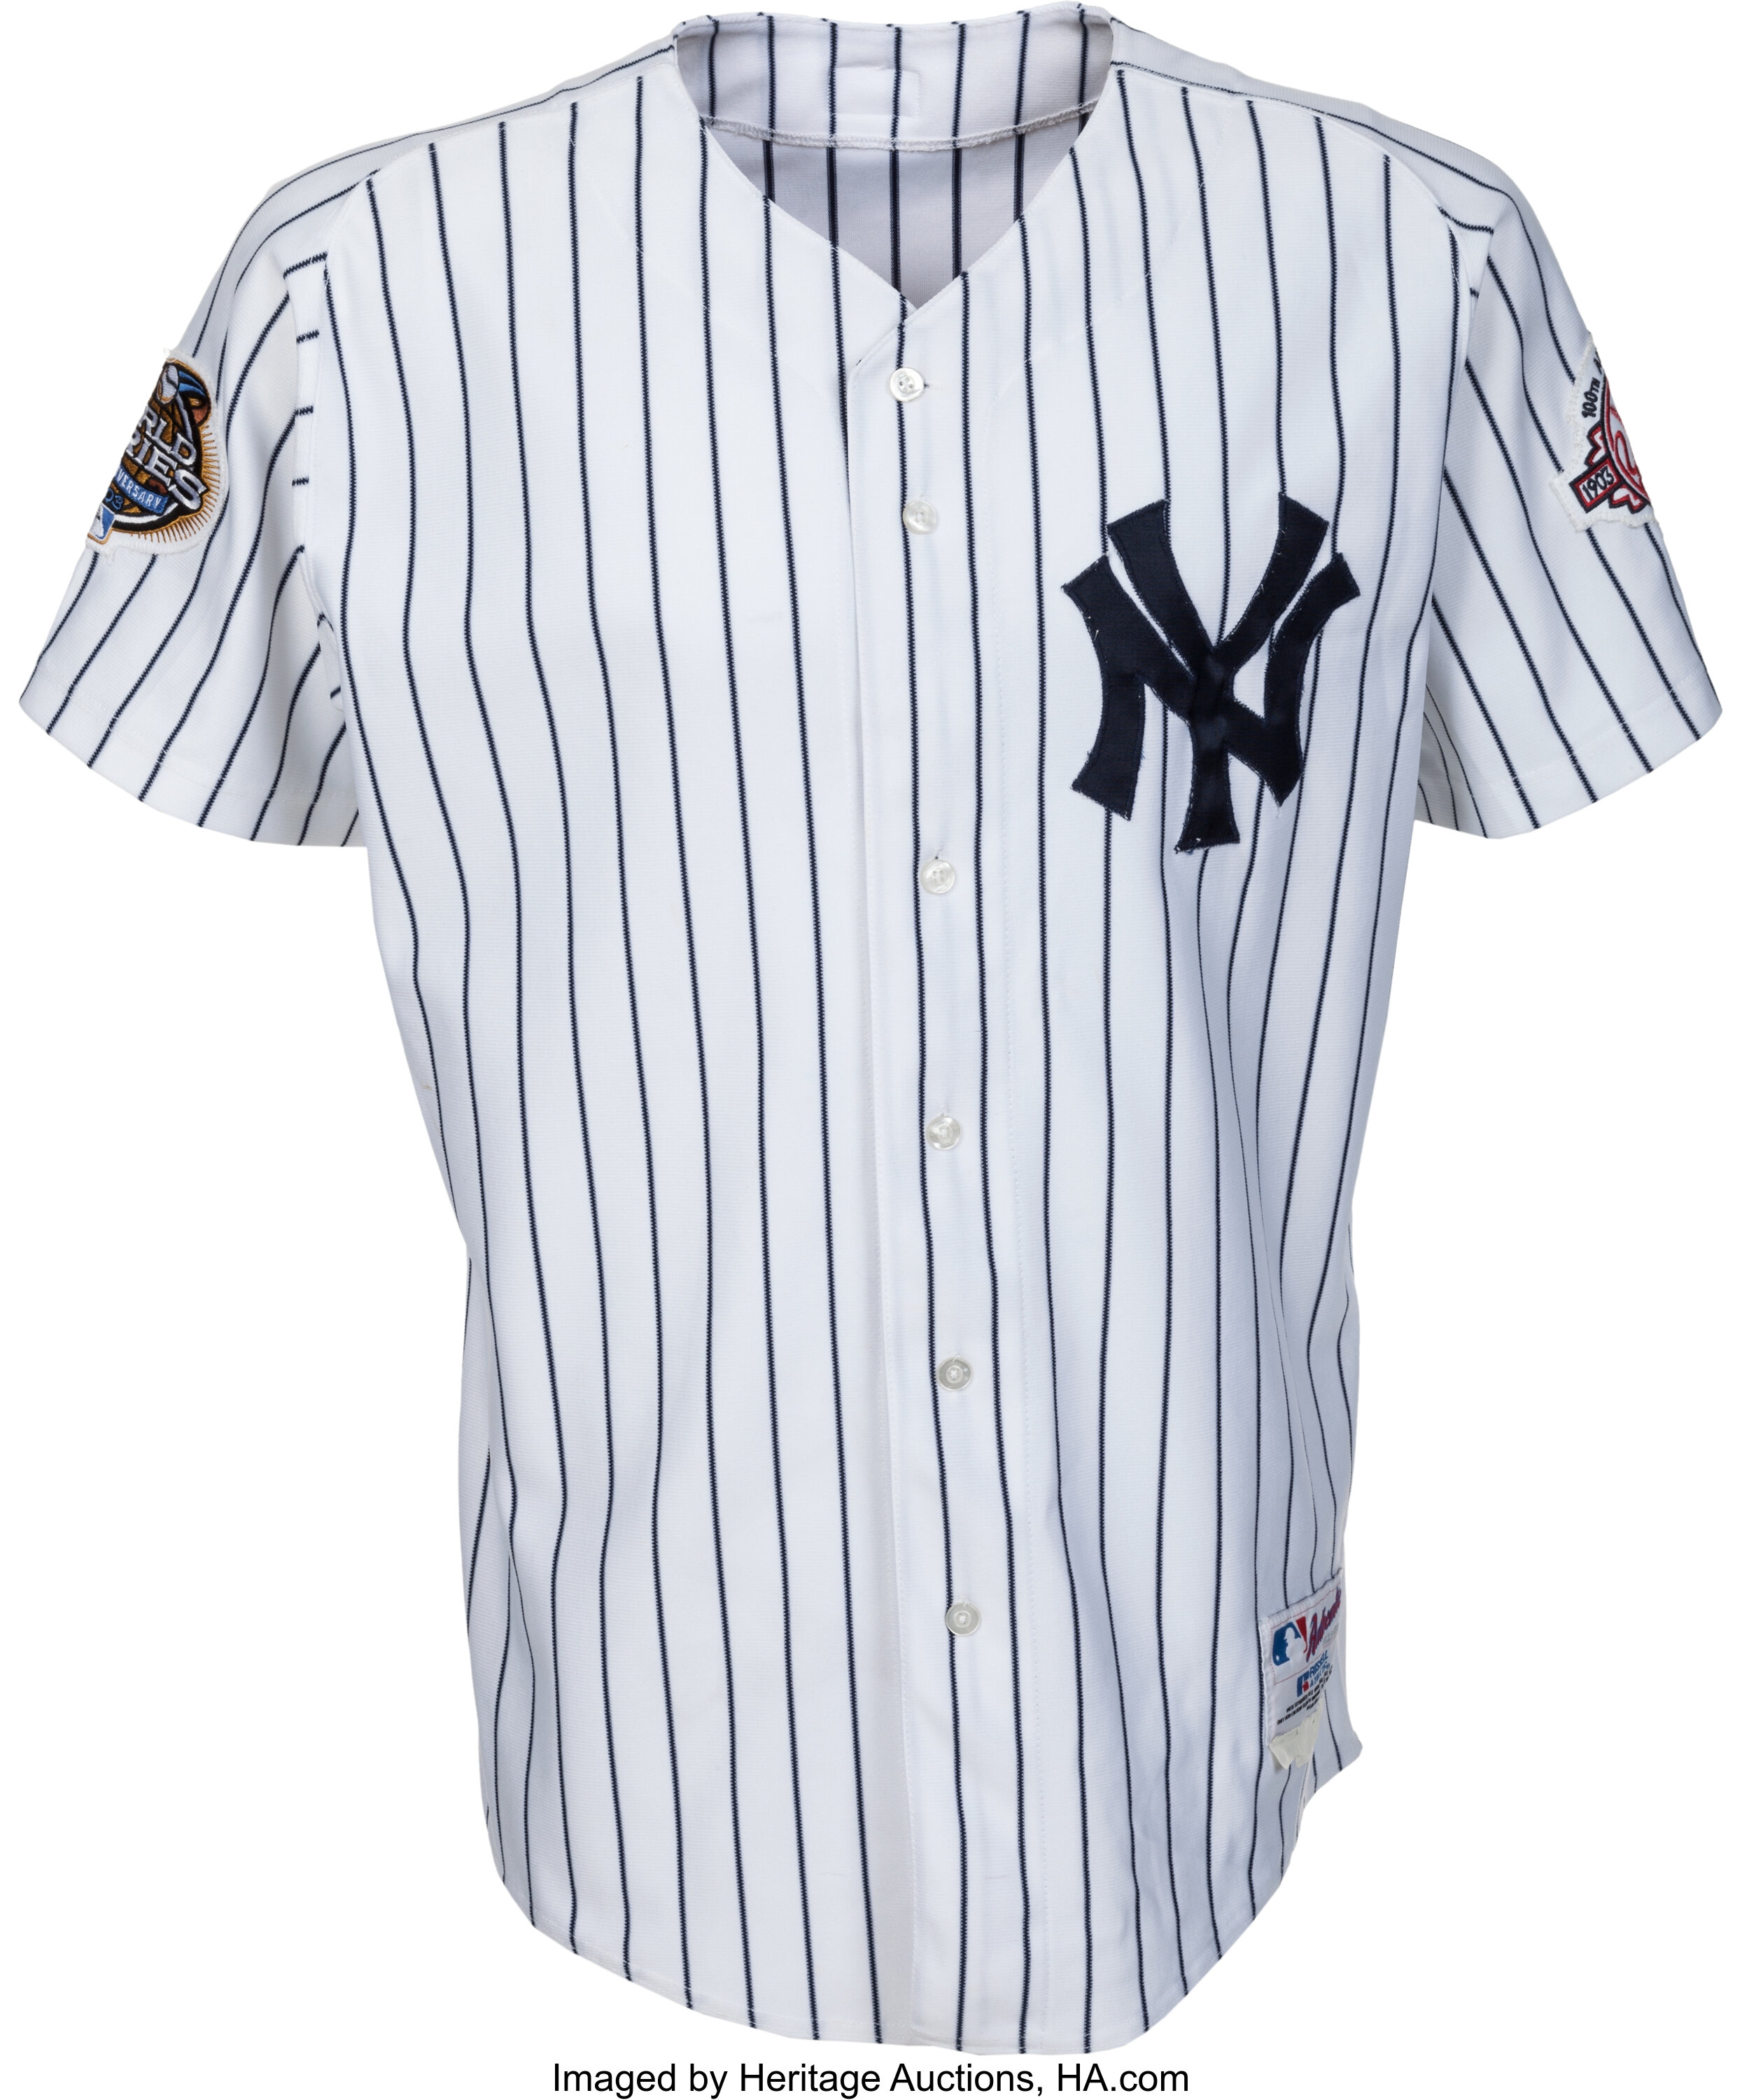 Derek Jeter #2 - NY Yankees: (2009: WS Champions - Jersey w/Tags